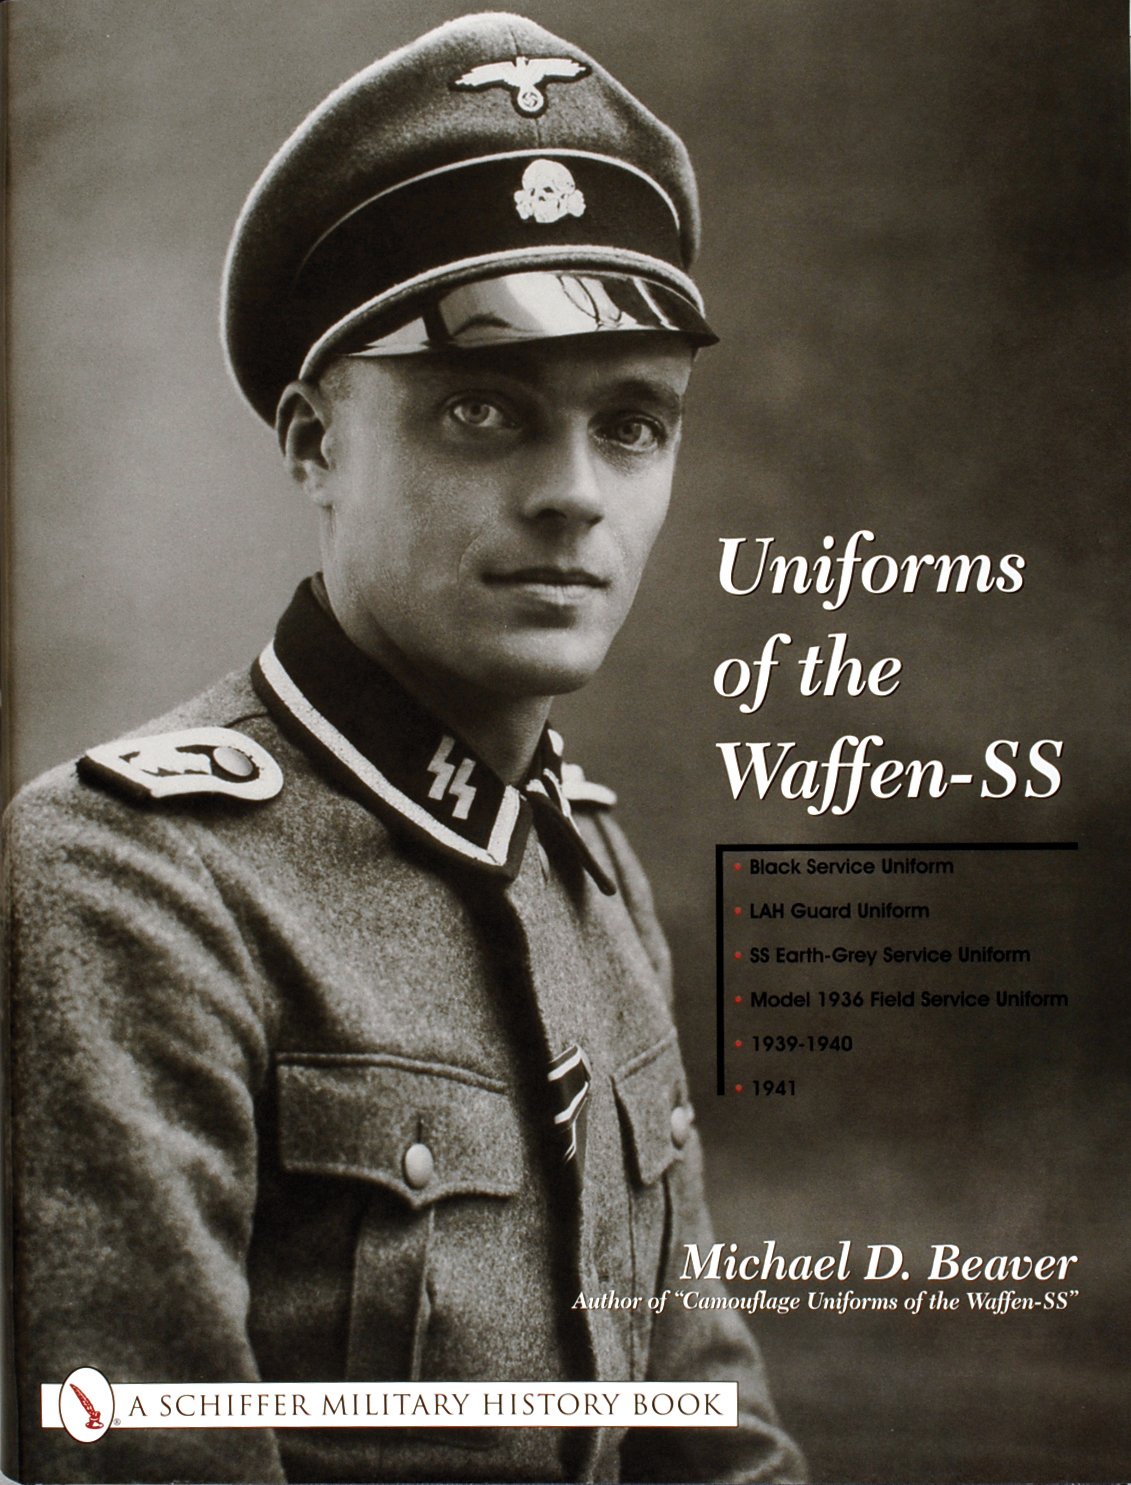 Uniforms of the Waffen-SS Vol. 1